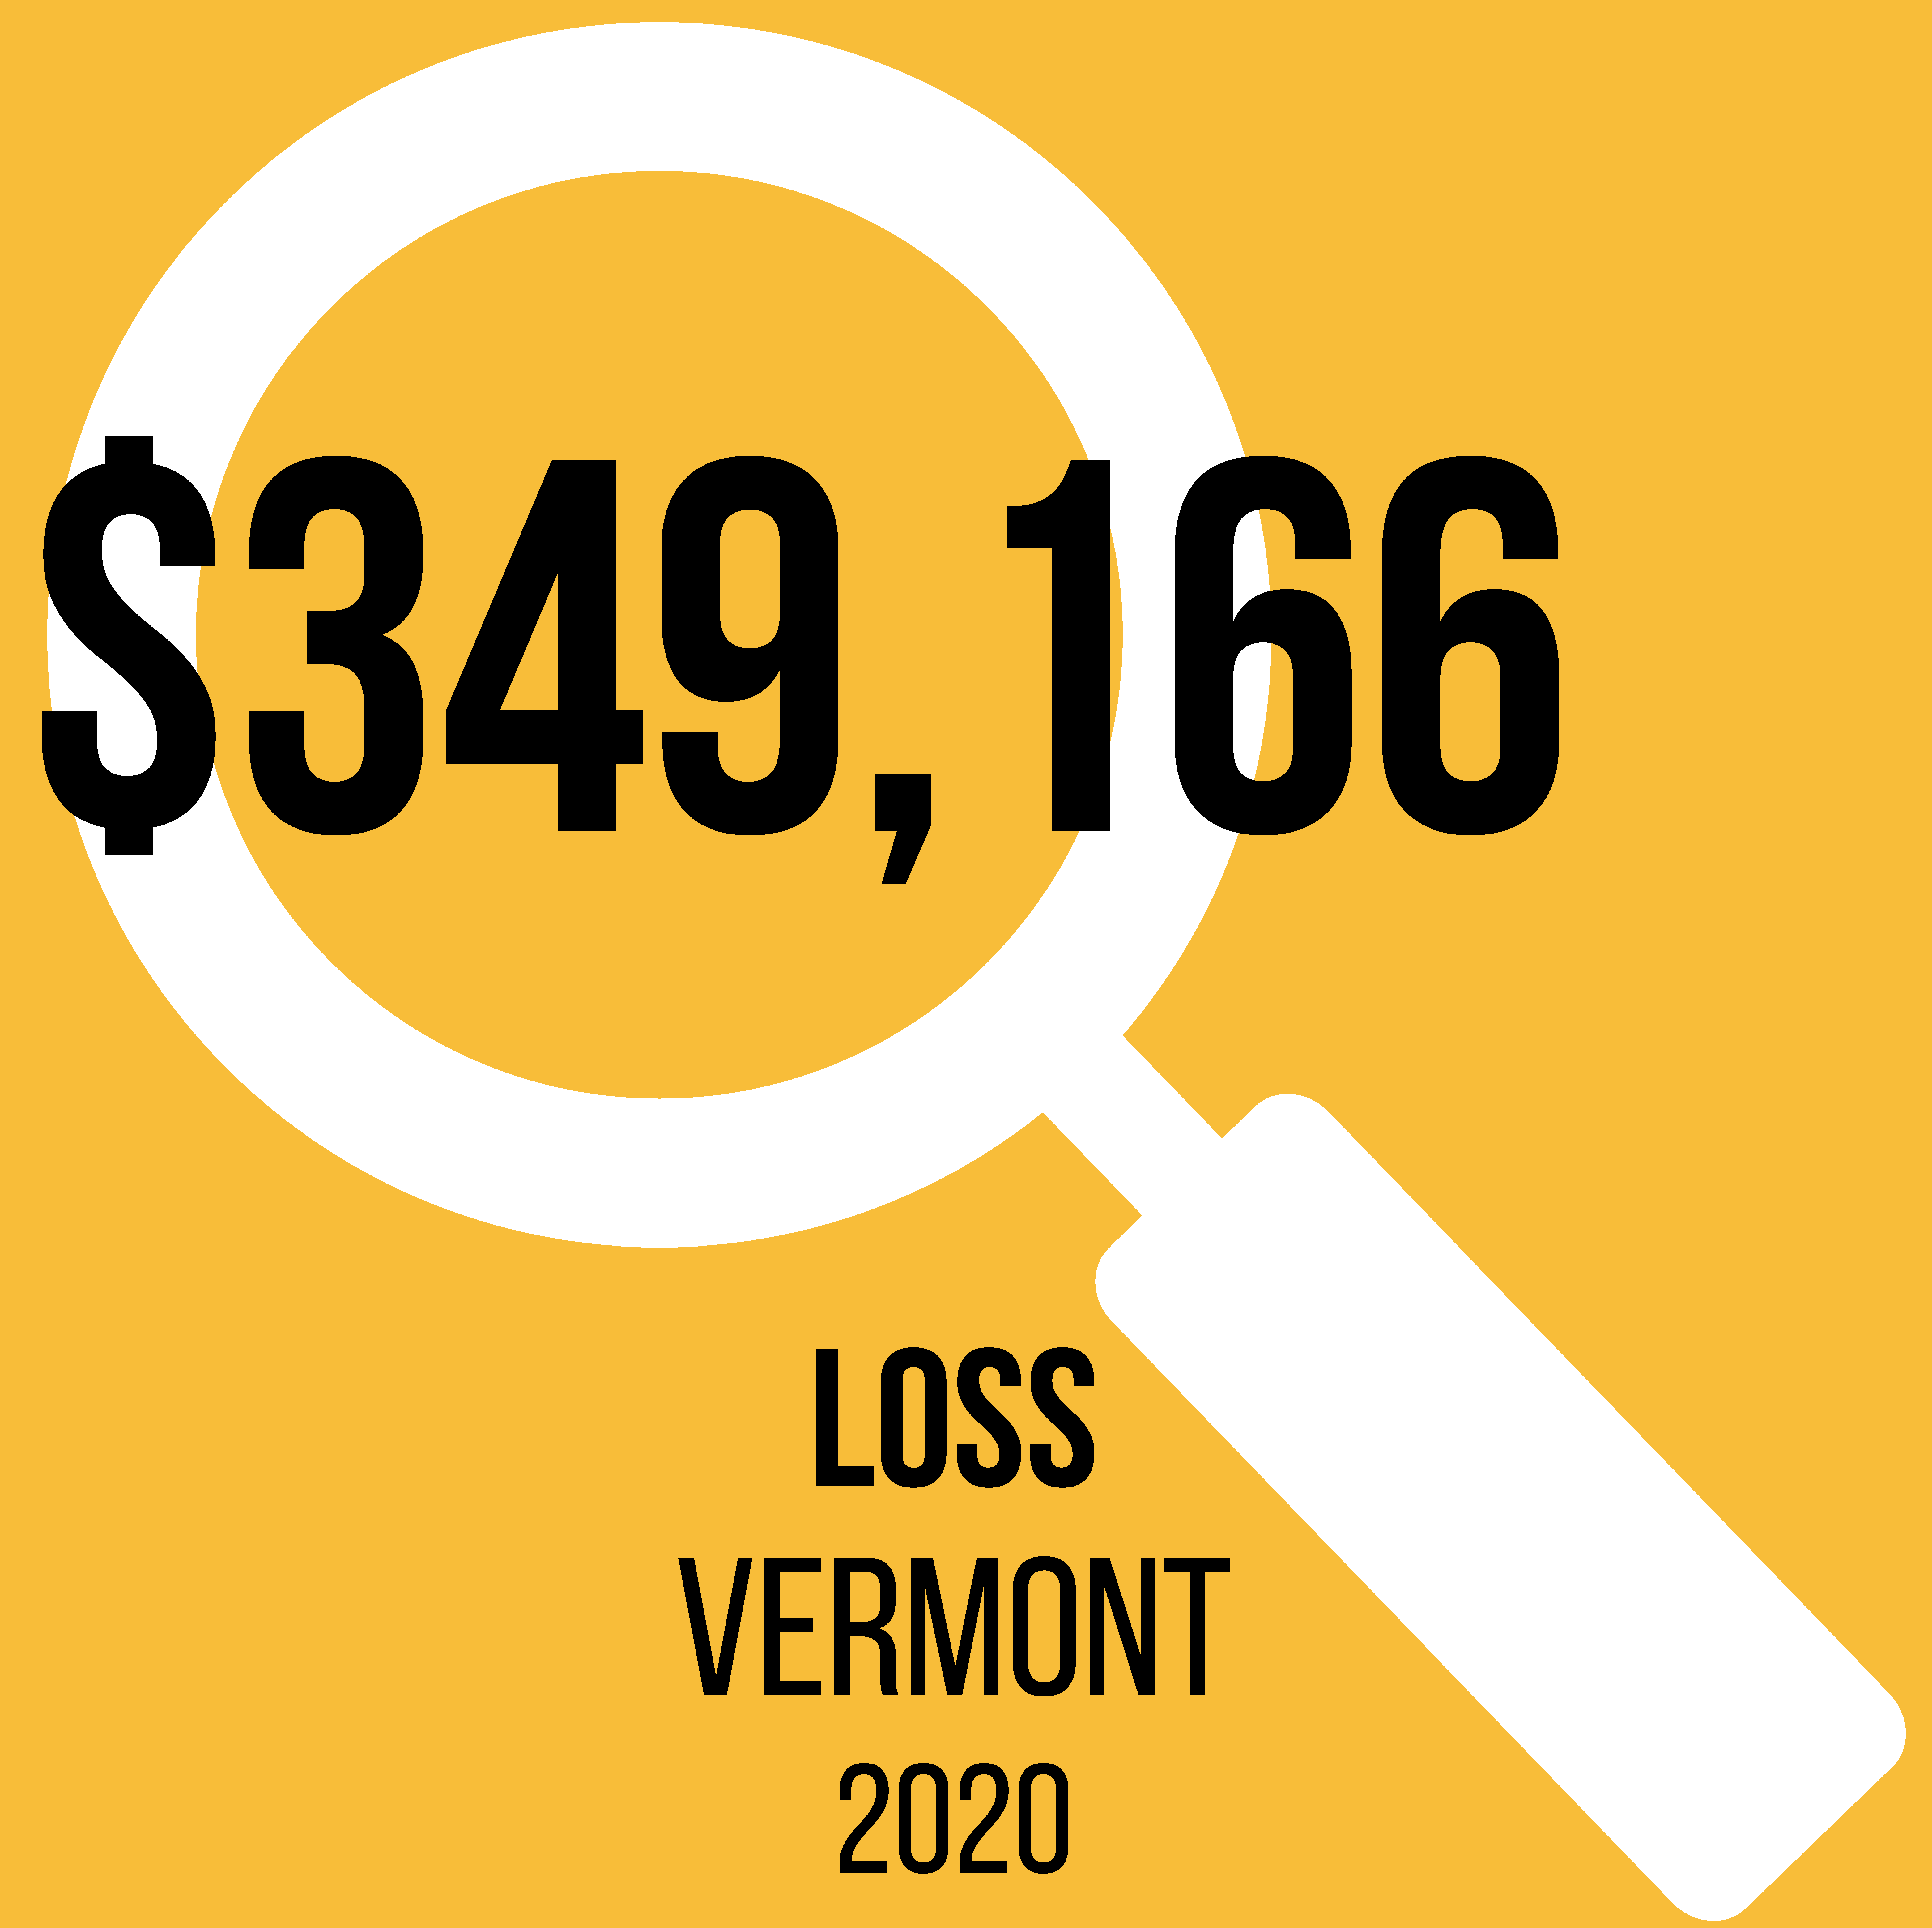 $349,166 loss romance imposter scams in VT 2020